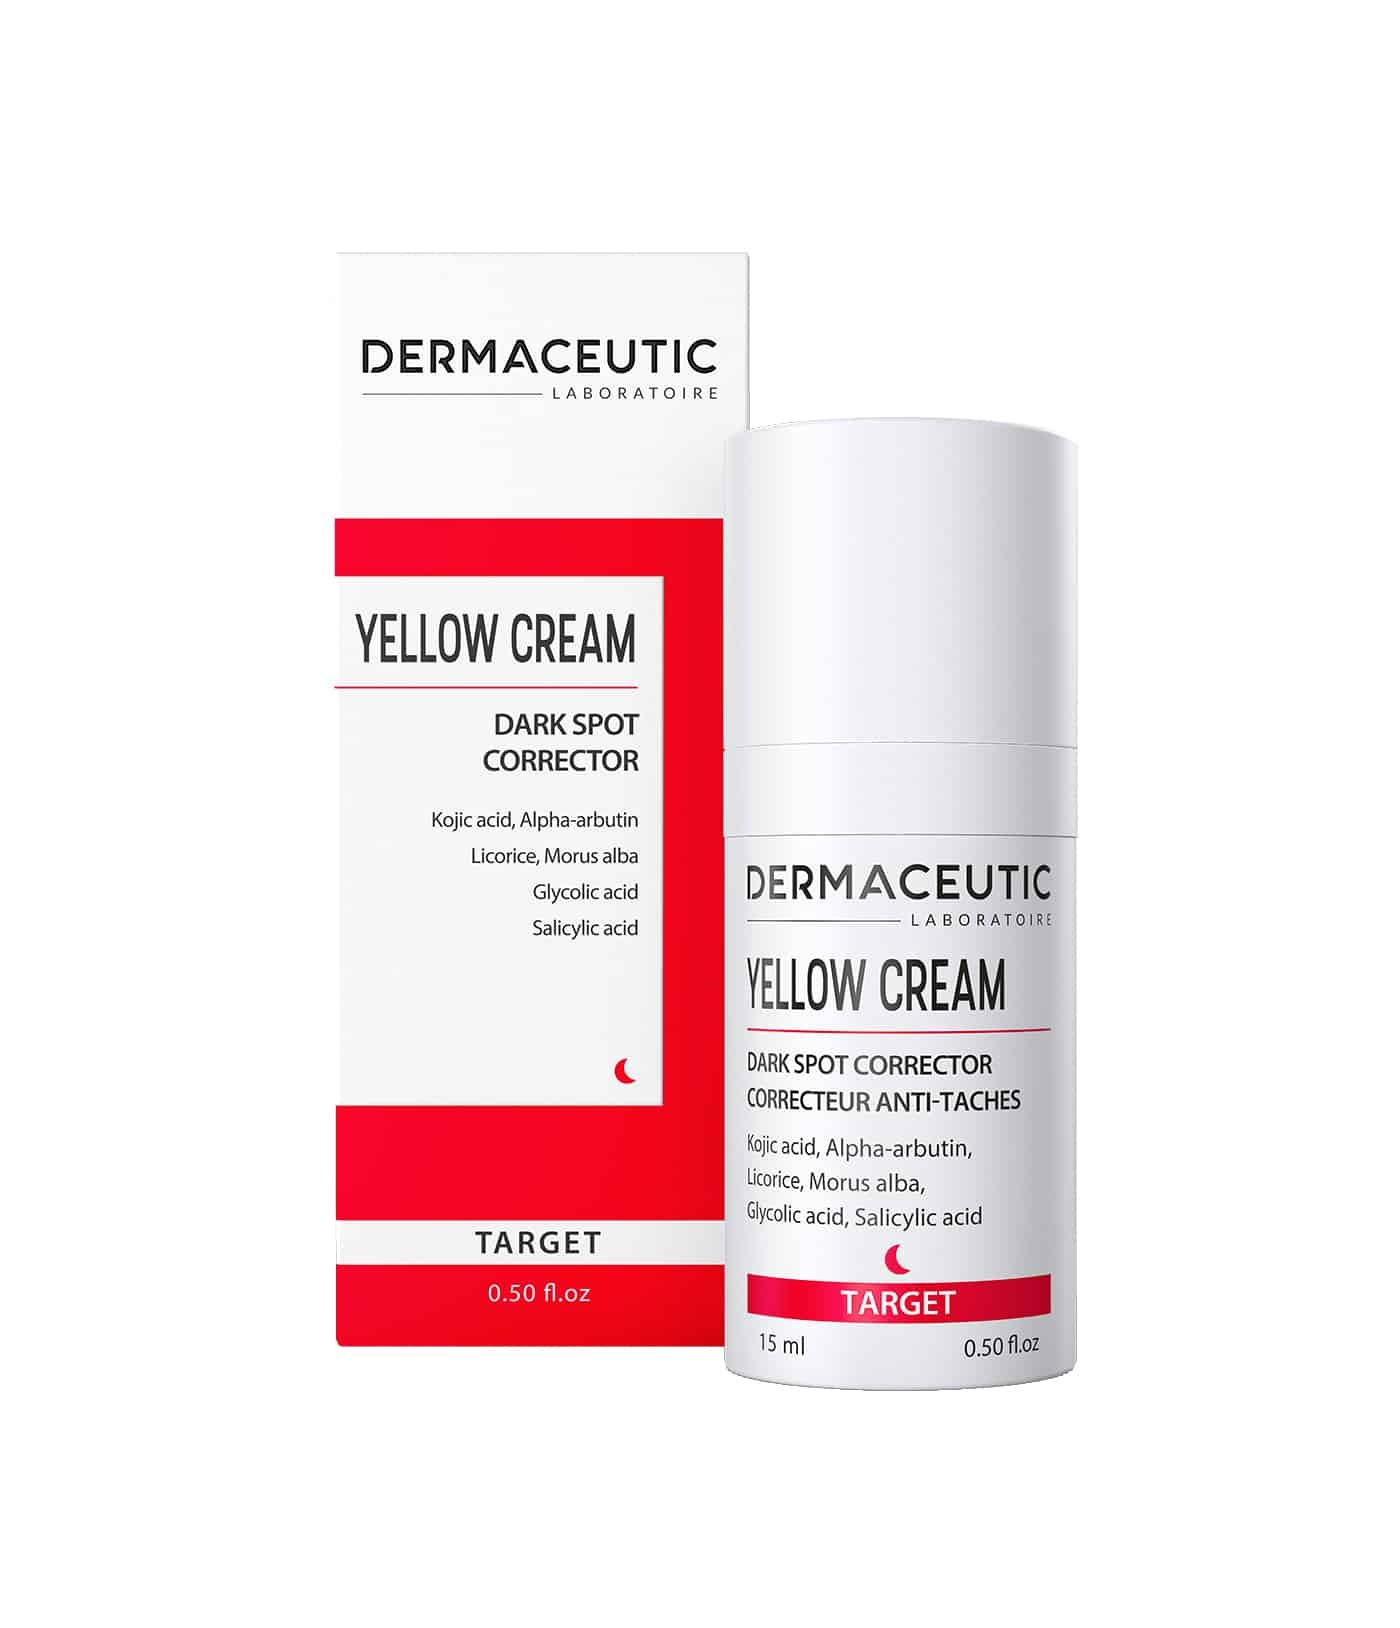 What is Dermaceutic Yellow Cream Used For?